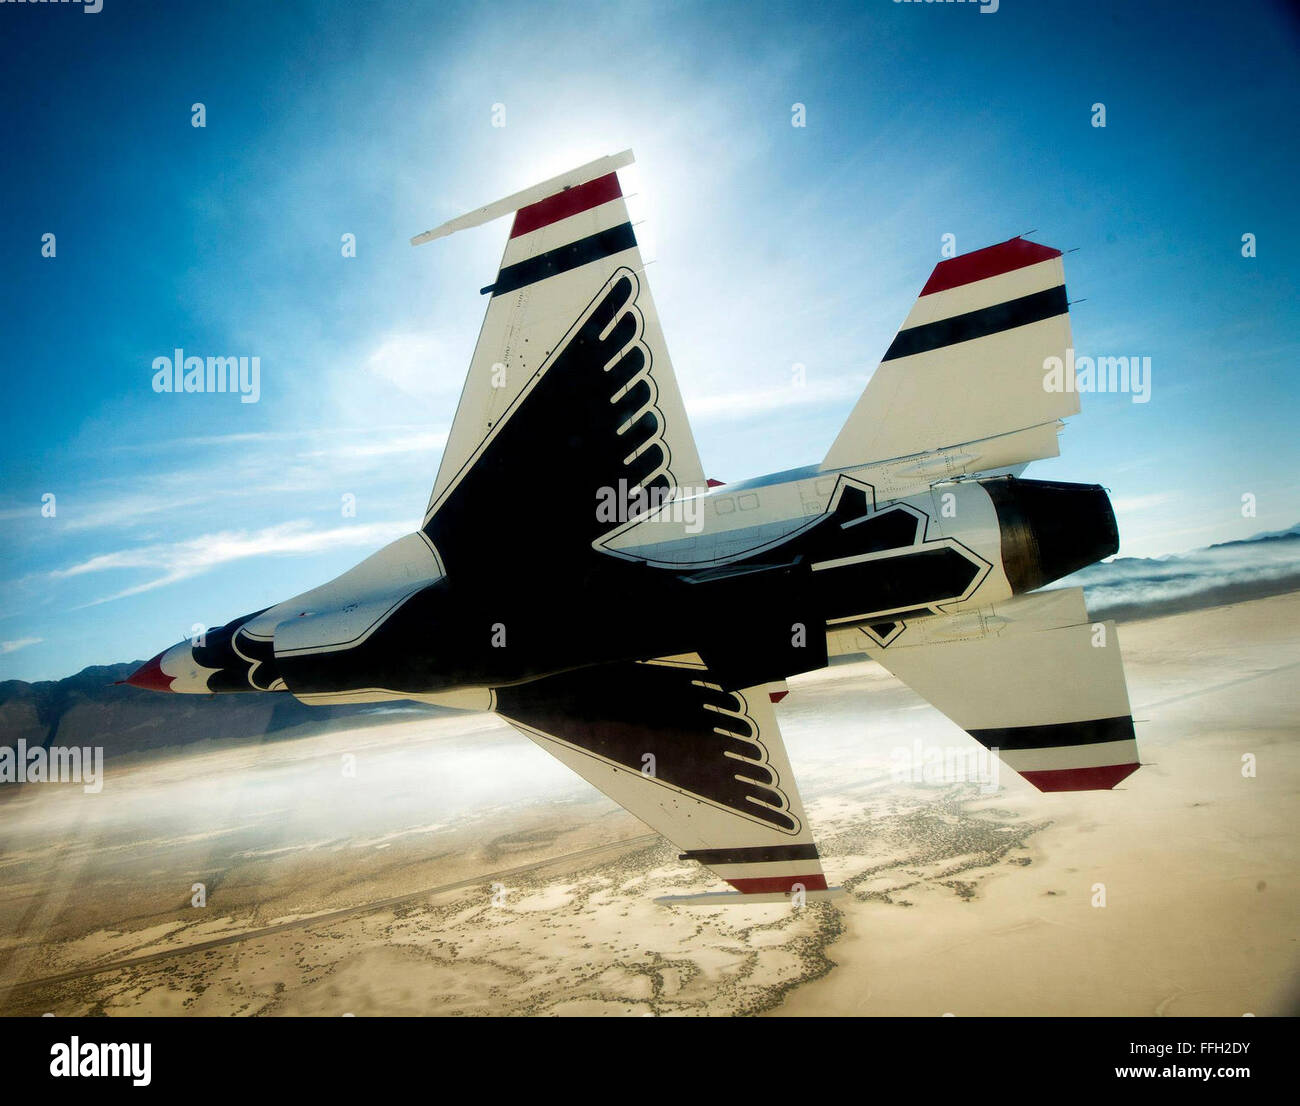 The Thunderbirds Diamond formation performs the Echelon Pass in Review maneuver March 13, 2013 during a practice sortie over a range in Nev. Stock Photo